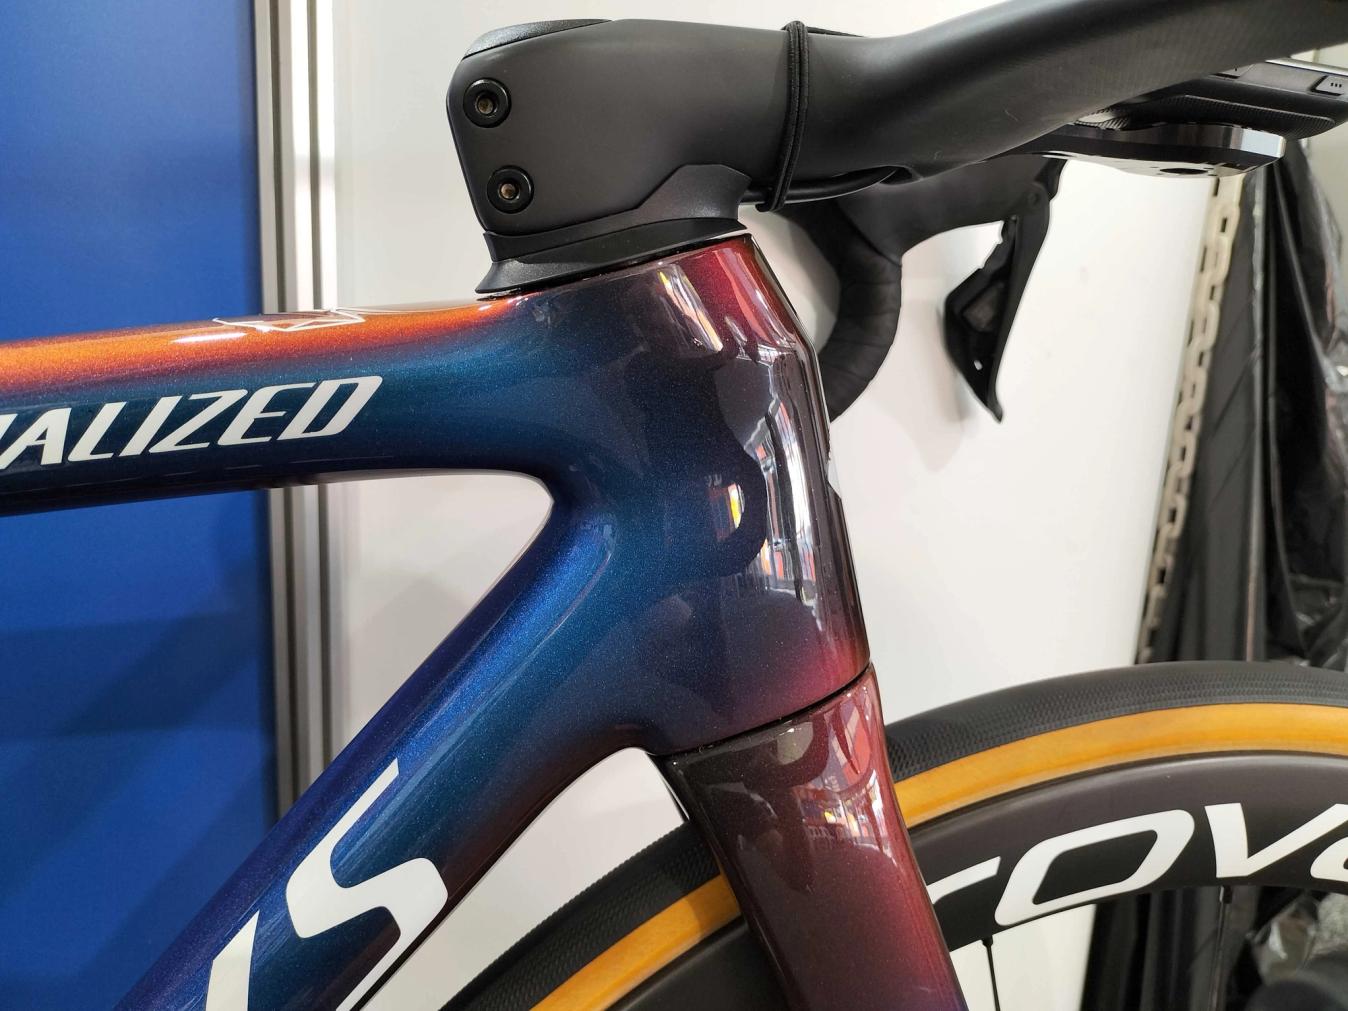 The Specialized Tarmac SL8 has a more bulbous head tube